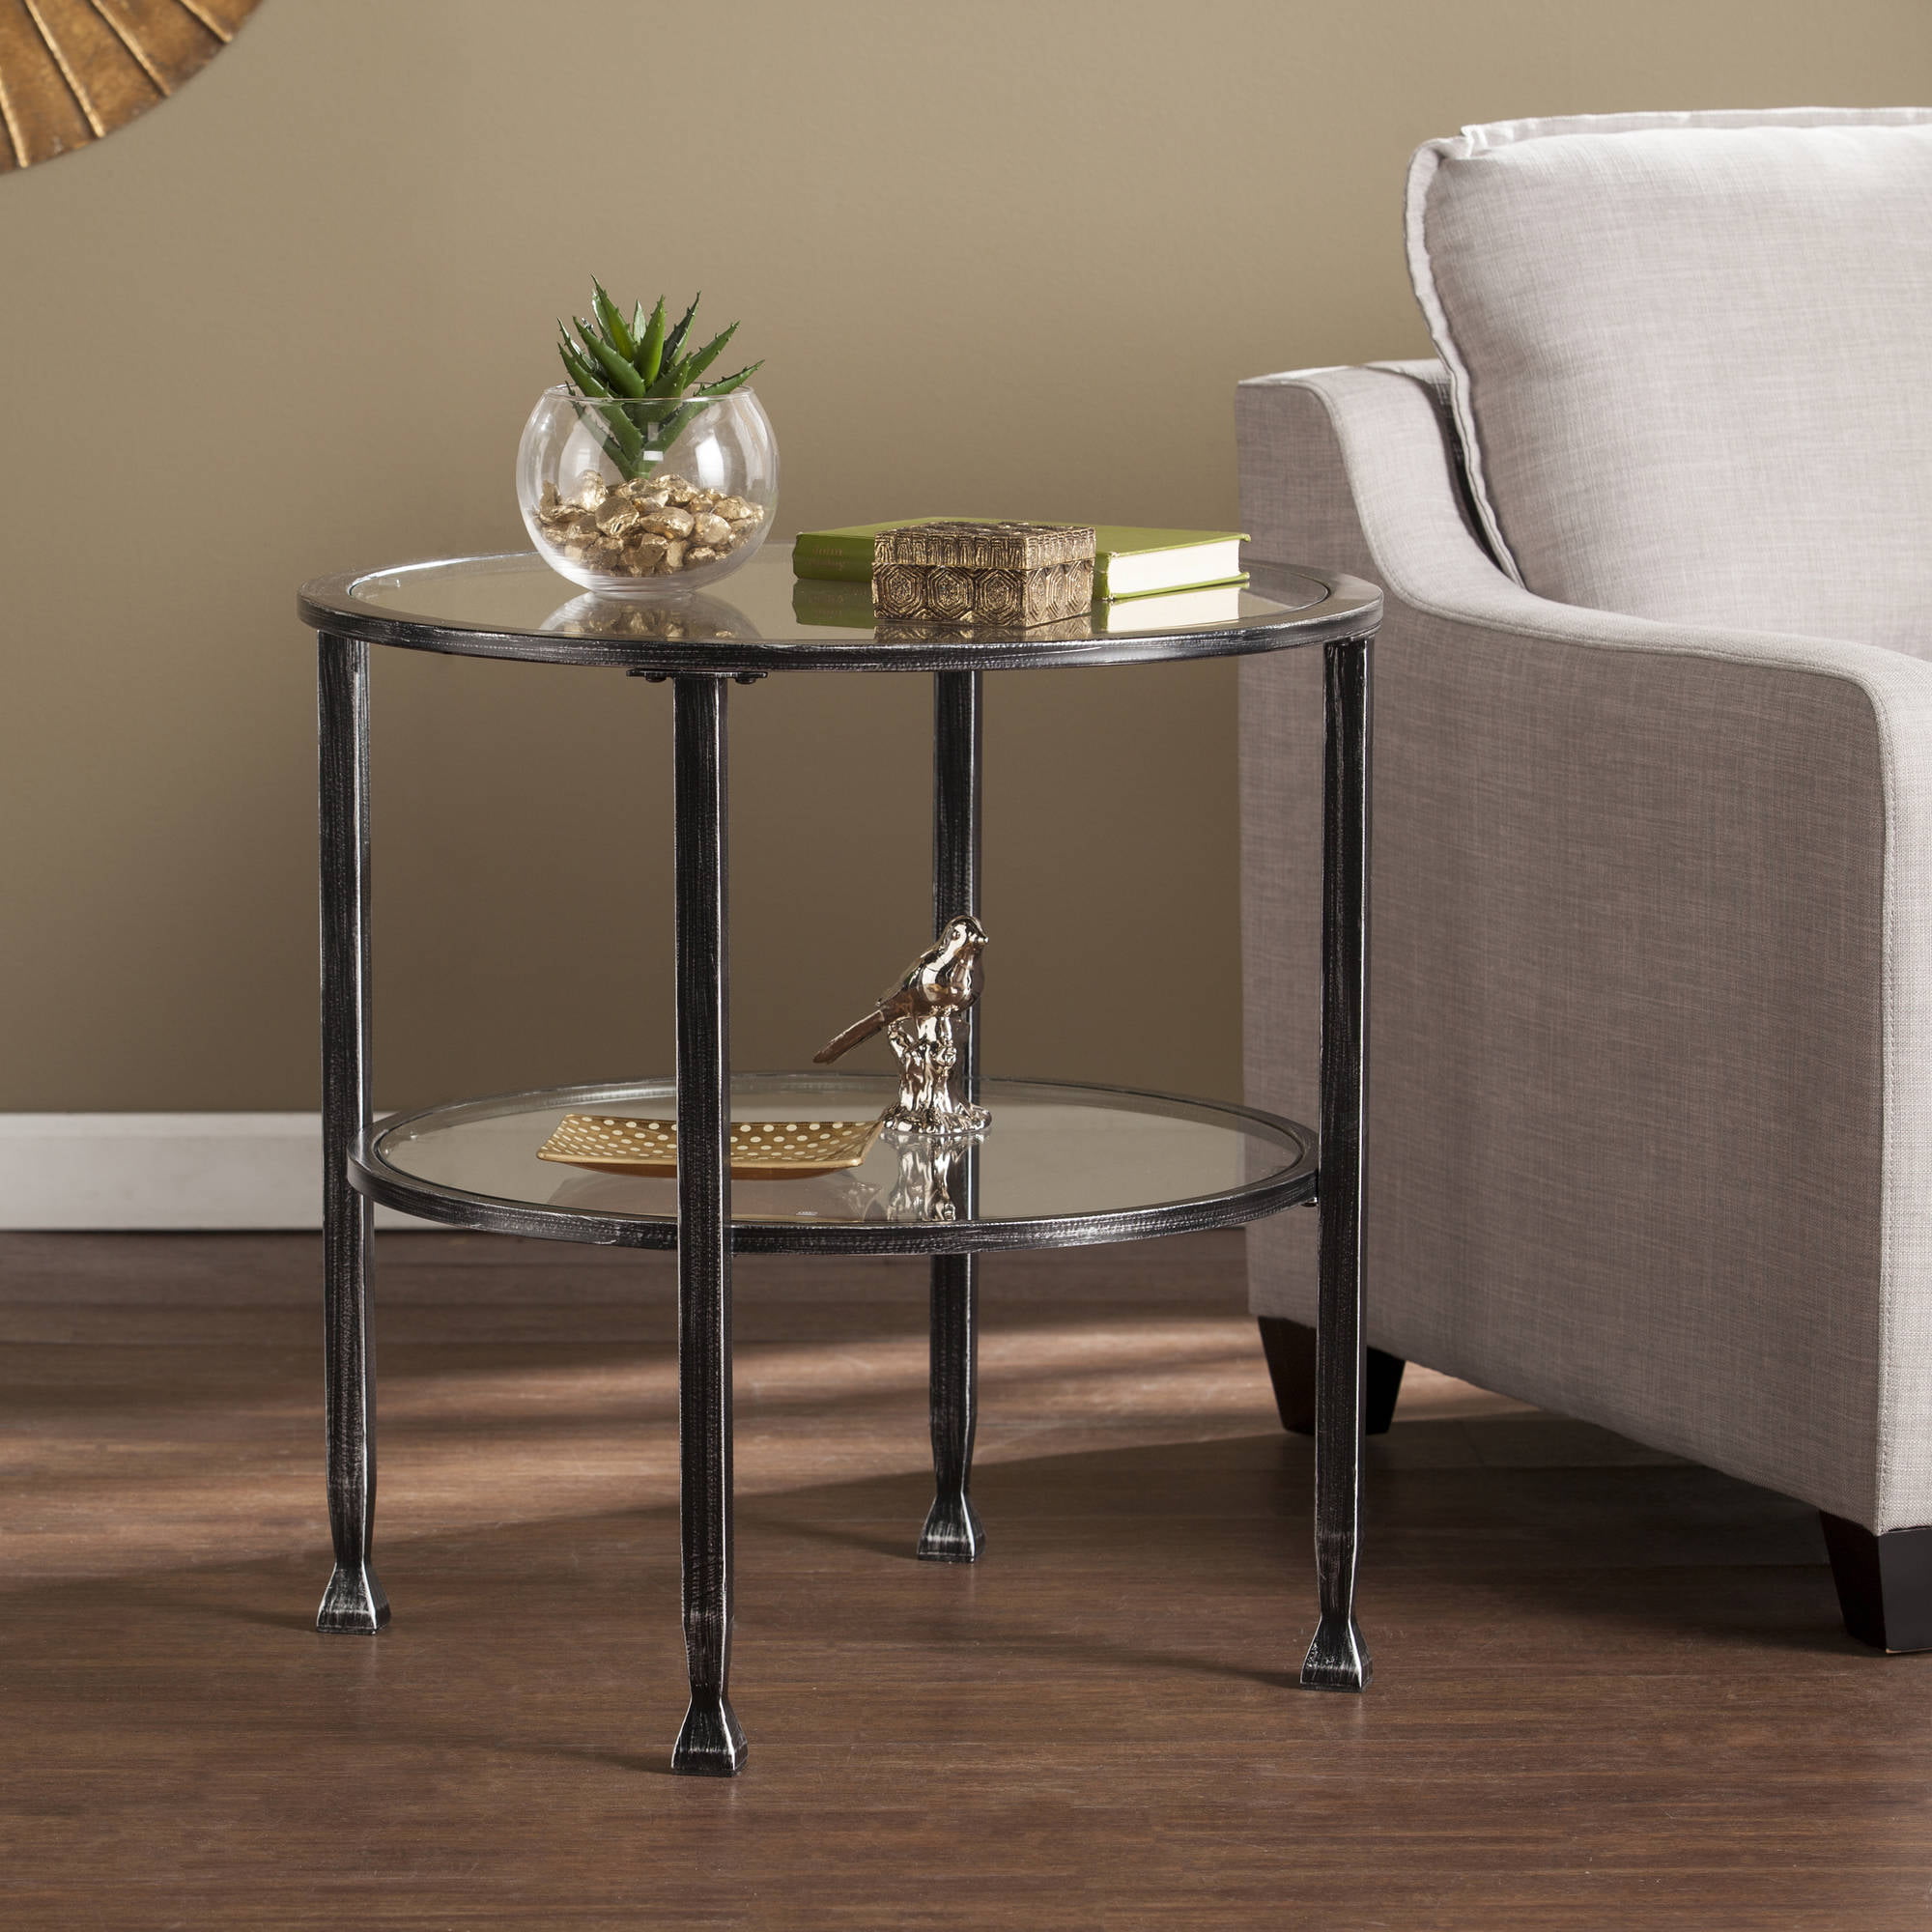 Jumpluff Metal Glass Round End Table Black